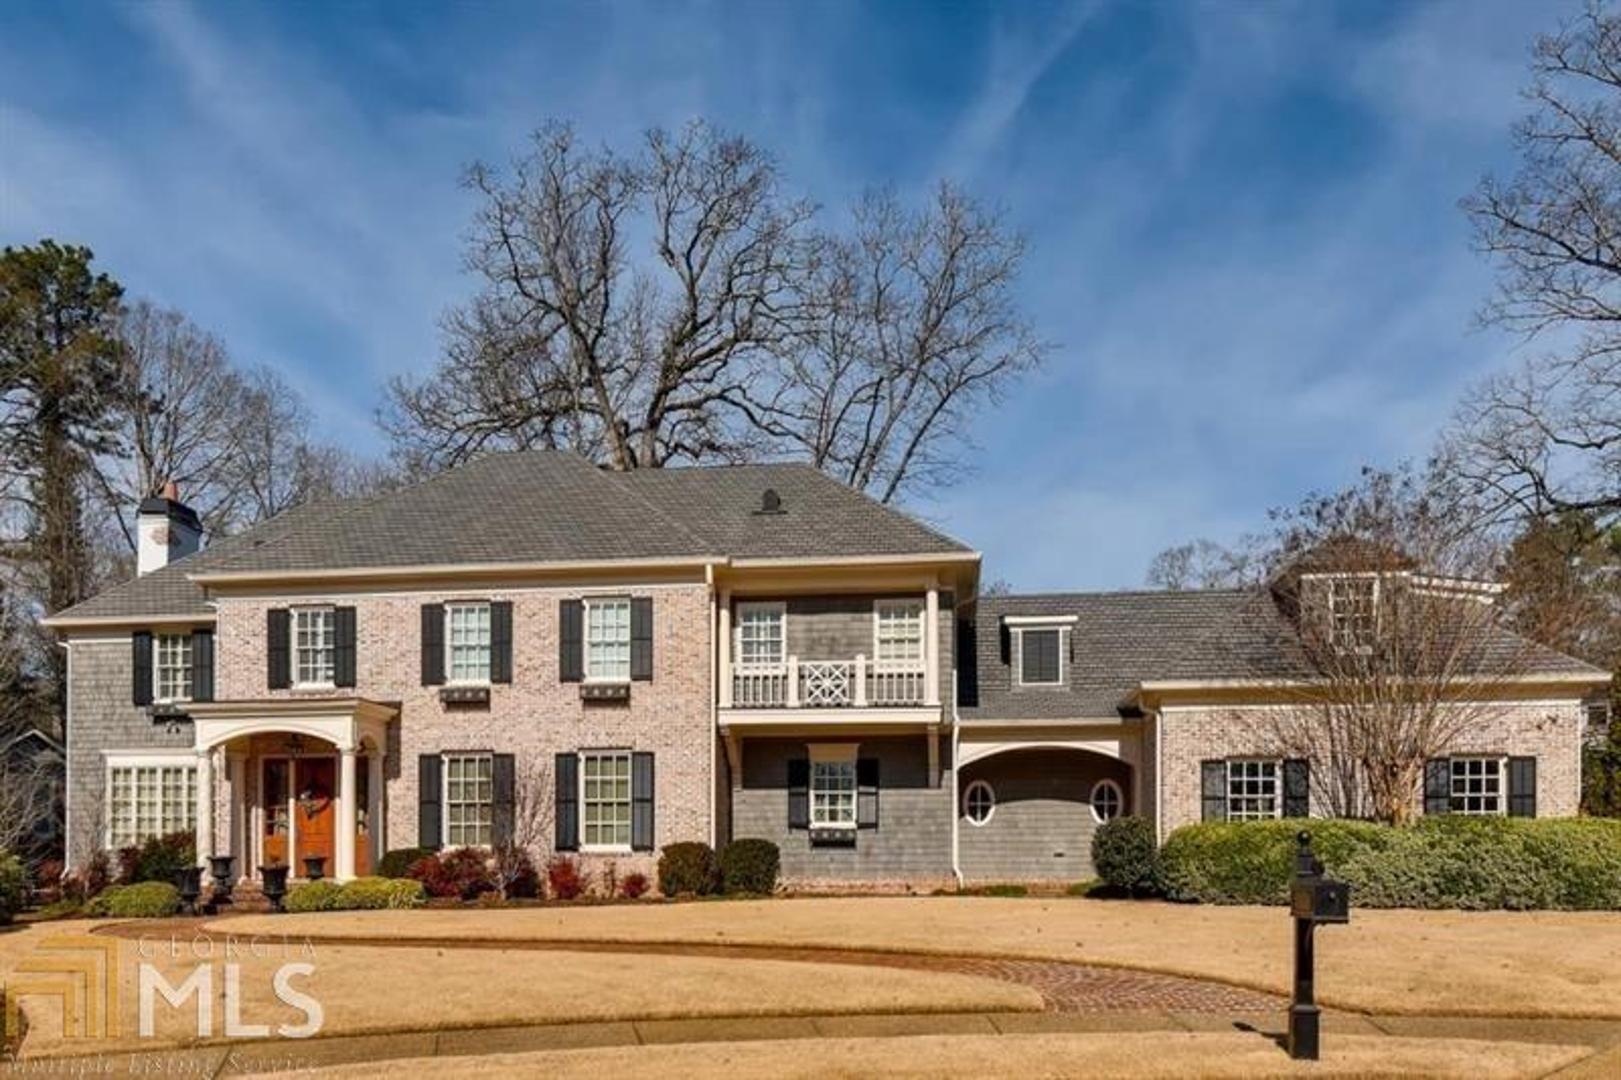 This large Buckhead home sits on a wonderful, flat lot in a cul de sac.